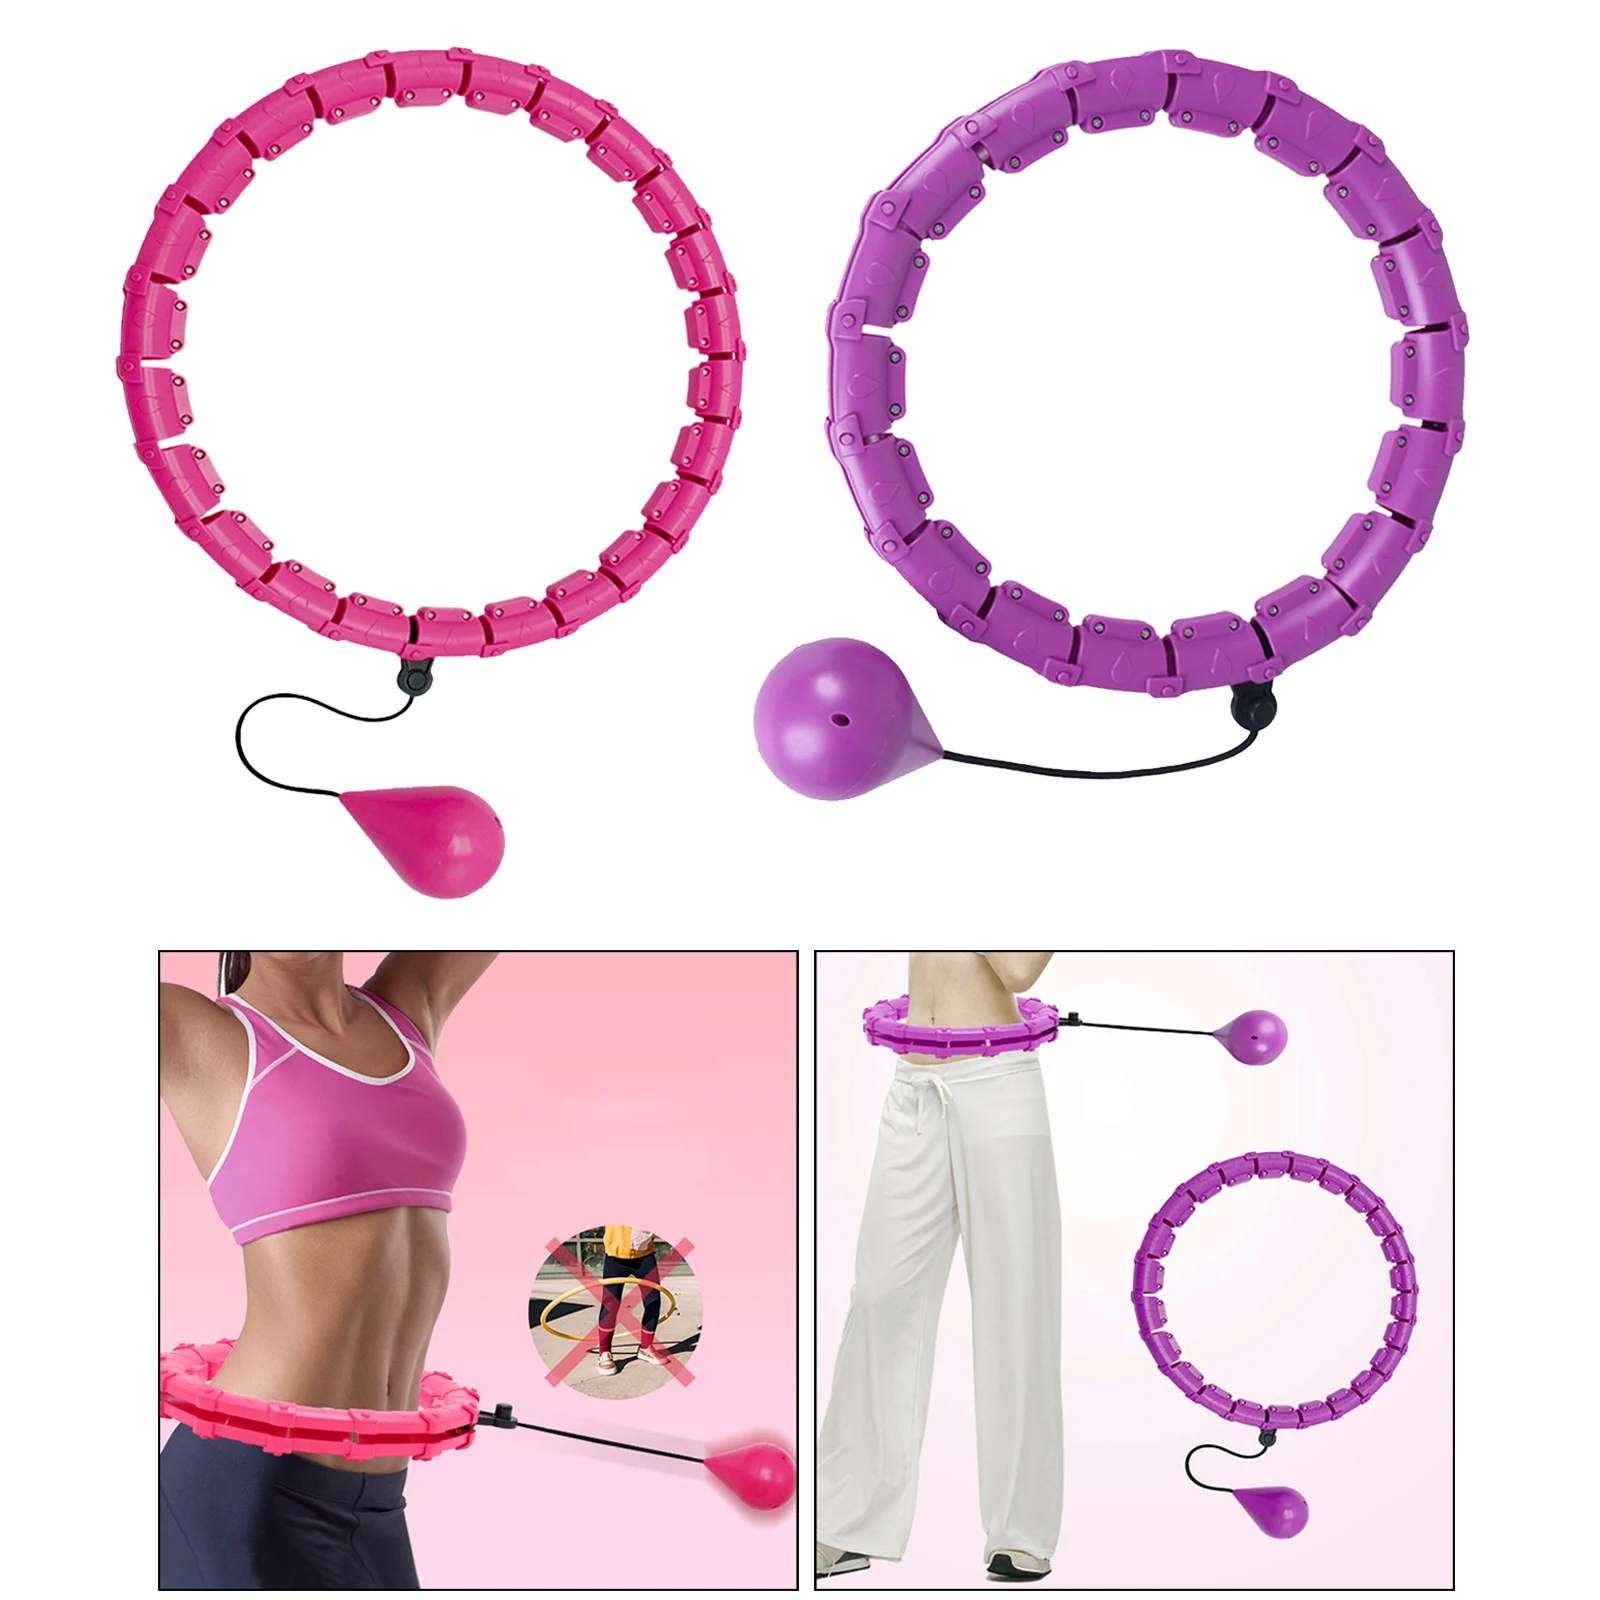 Intelligent Counting Fitness Sport Ring Smart Sport Ring Adjustable Thin Waist Hoop Fitness Equipment Home Training